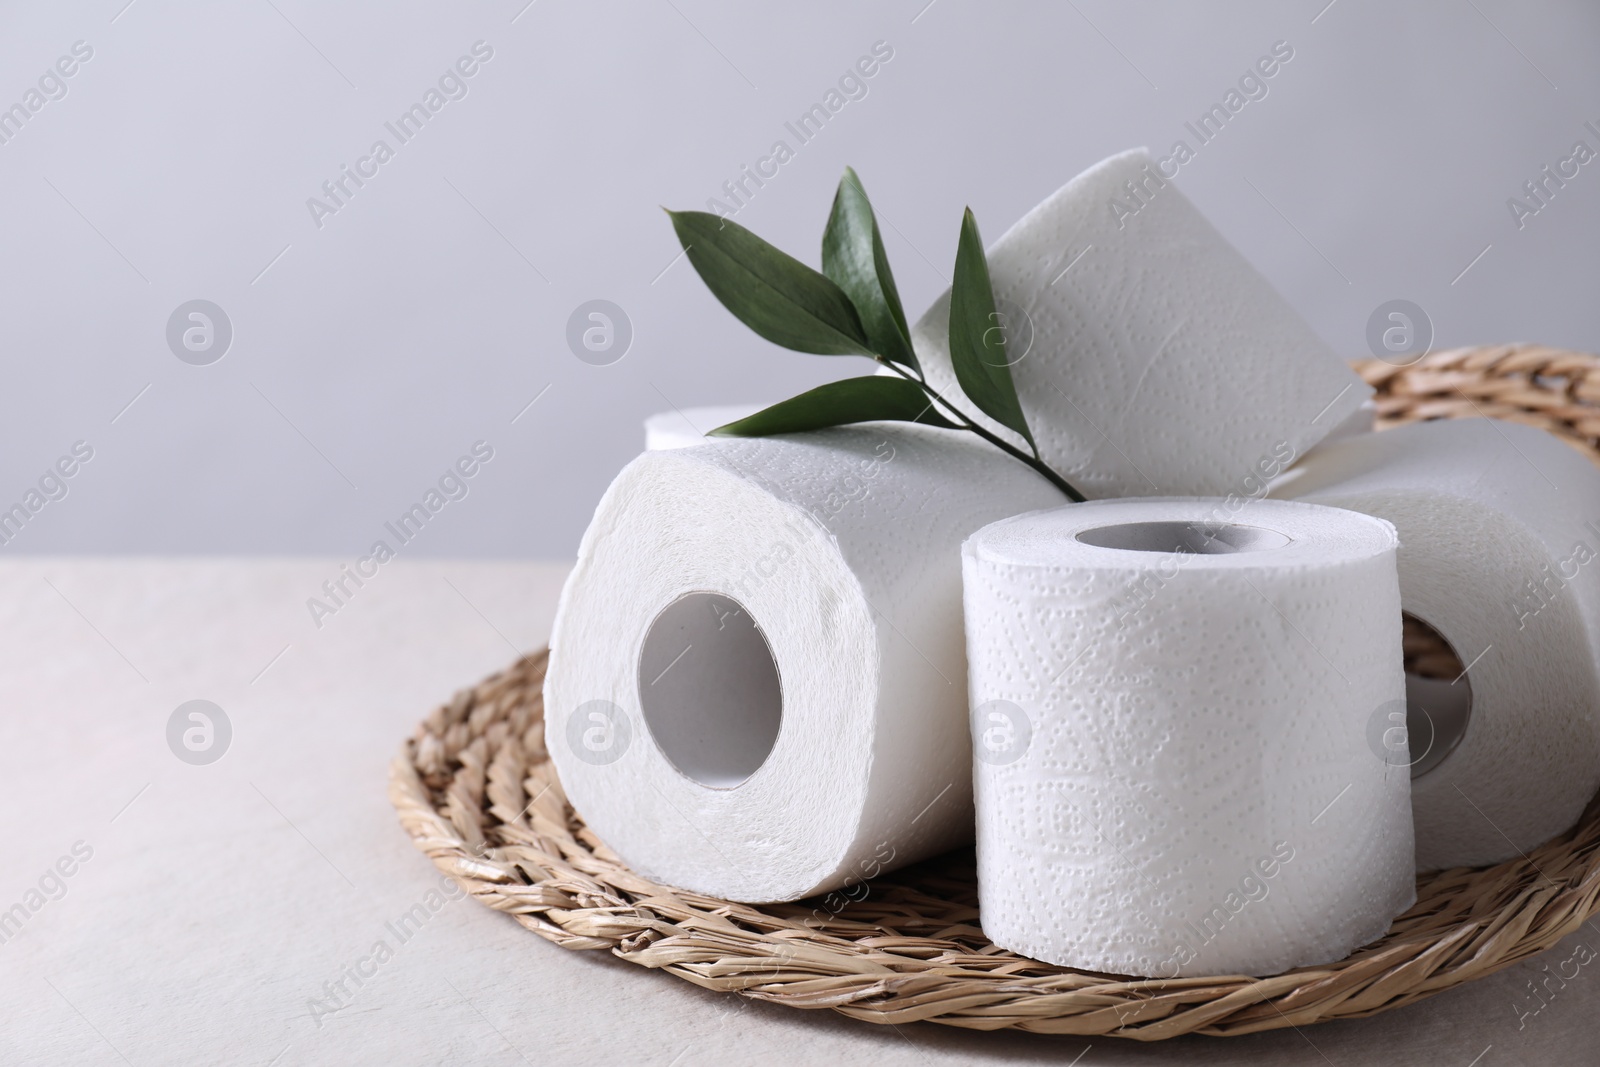 Photo of Toilet paper rolls and green leaves on white table, space for text